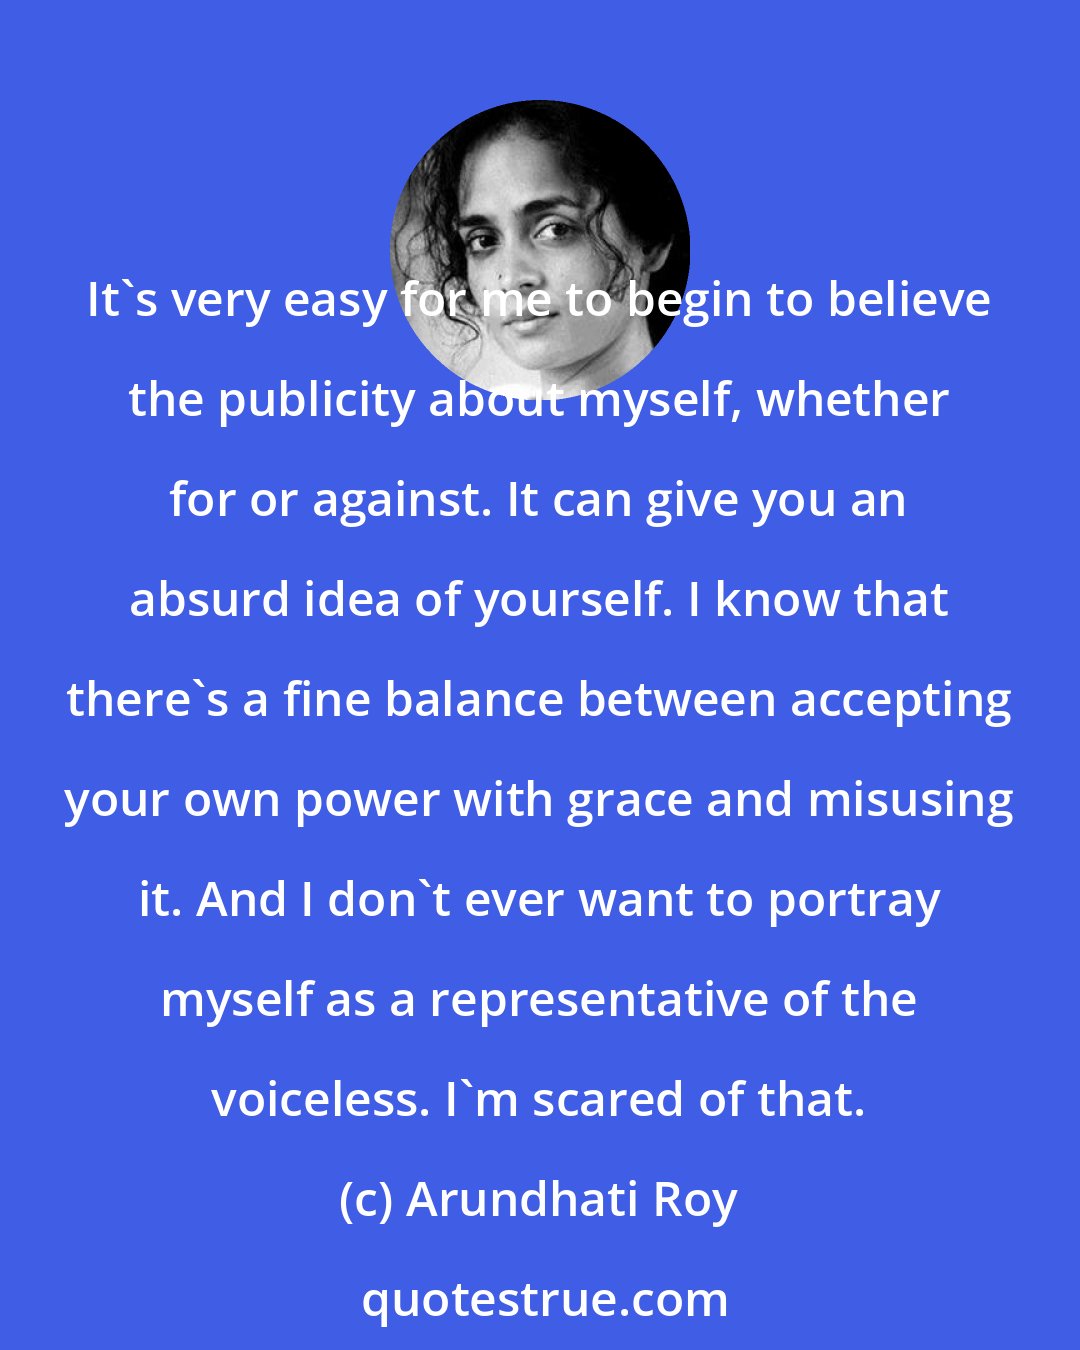 Arundhati Roy: It's very easy for me to begin to believe the publicity about myself, whether for or against. It can give you an absurd idea of yourself. I know that there's a fine balance between accepting your own power with grace and misusing it. And I don't ever want to portray myself as a representative of the voiceless. I'm scared of that.